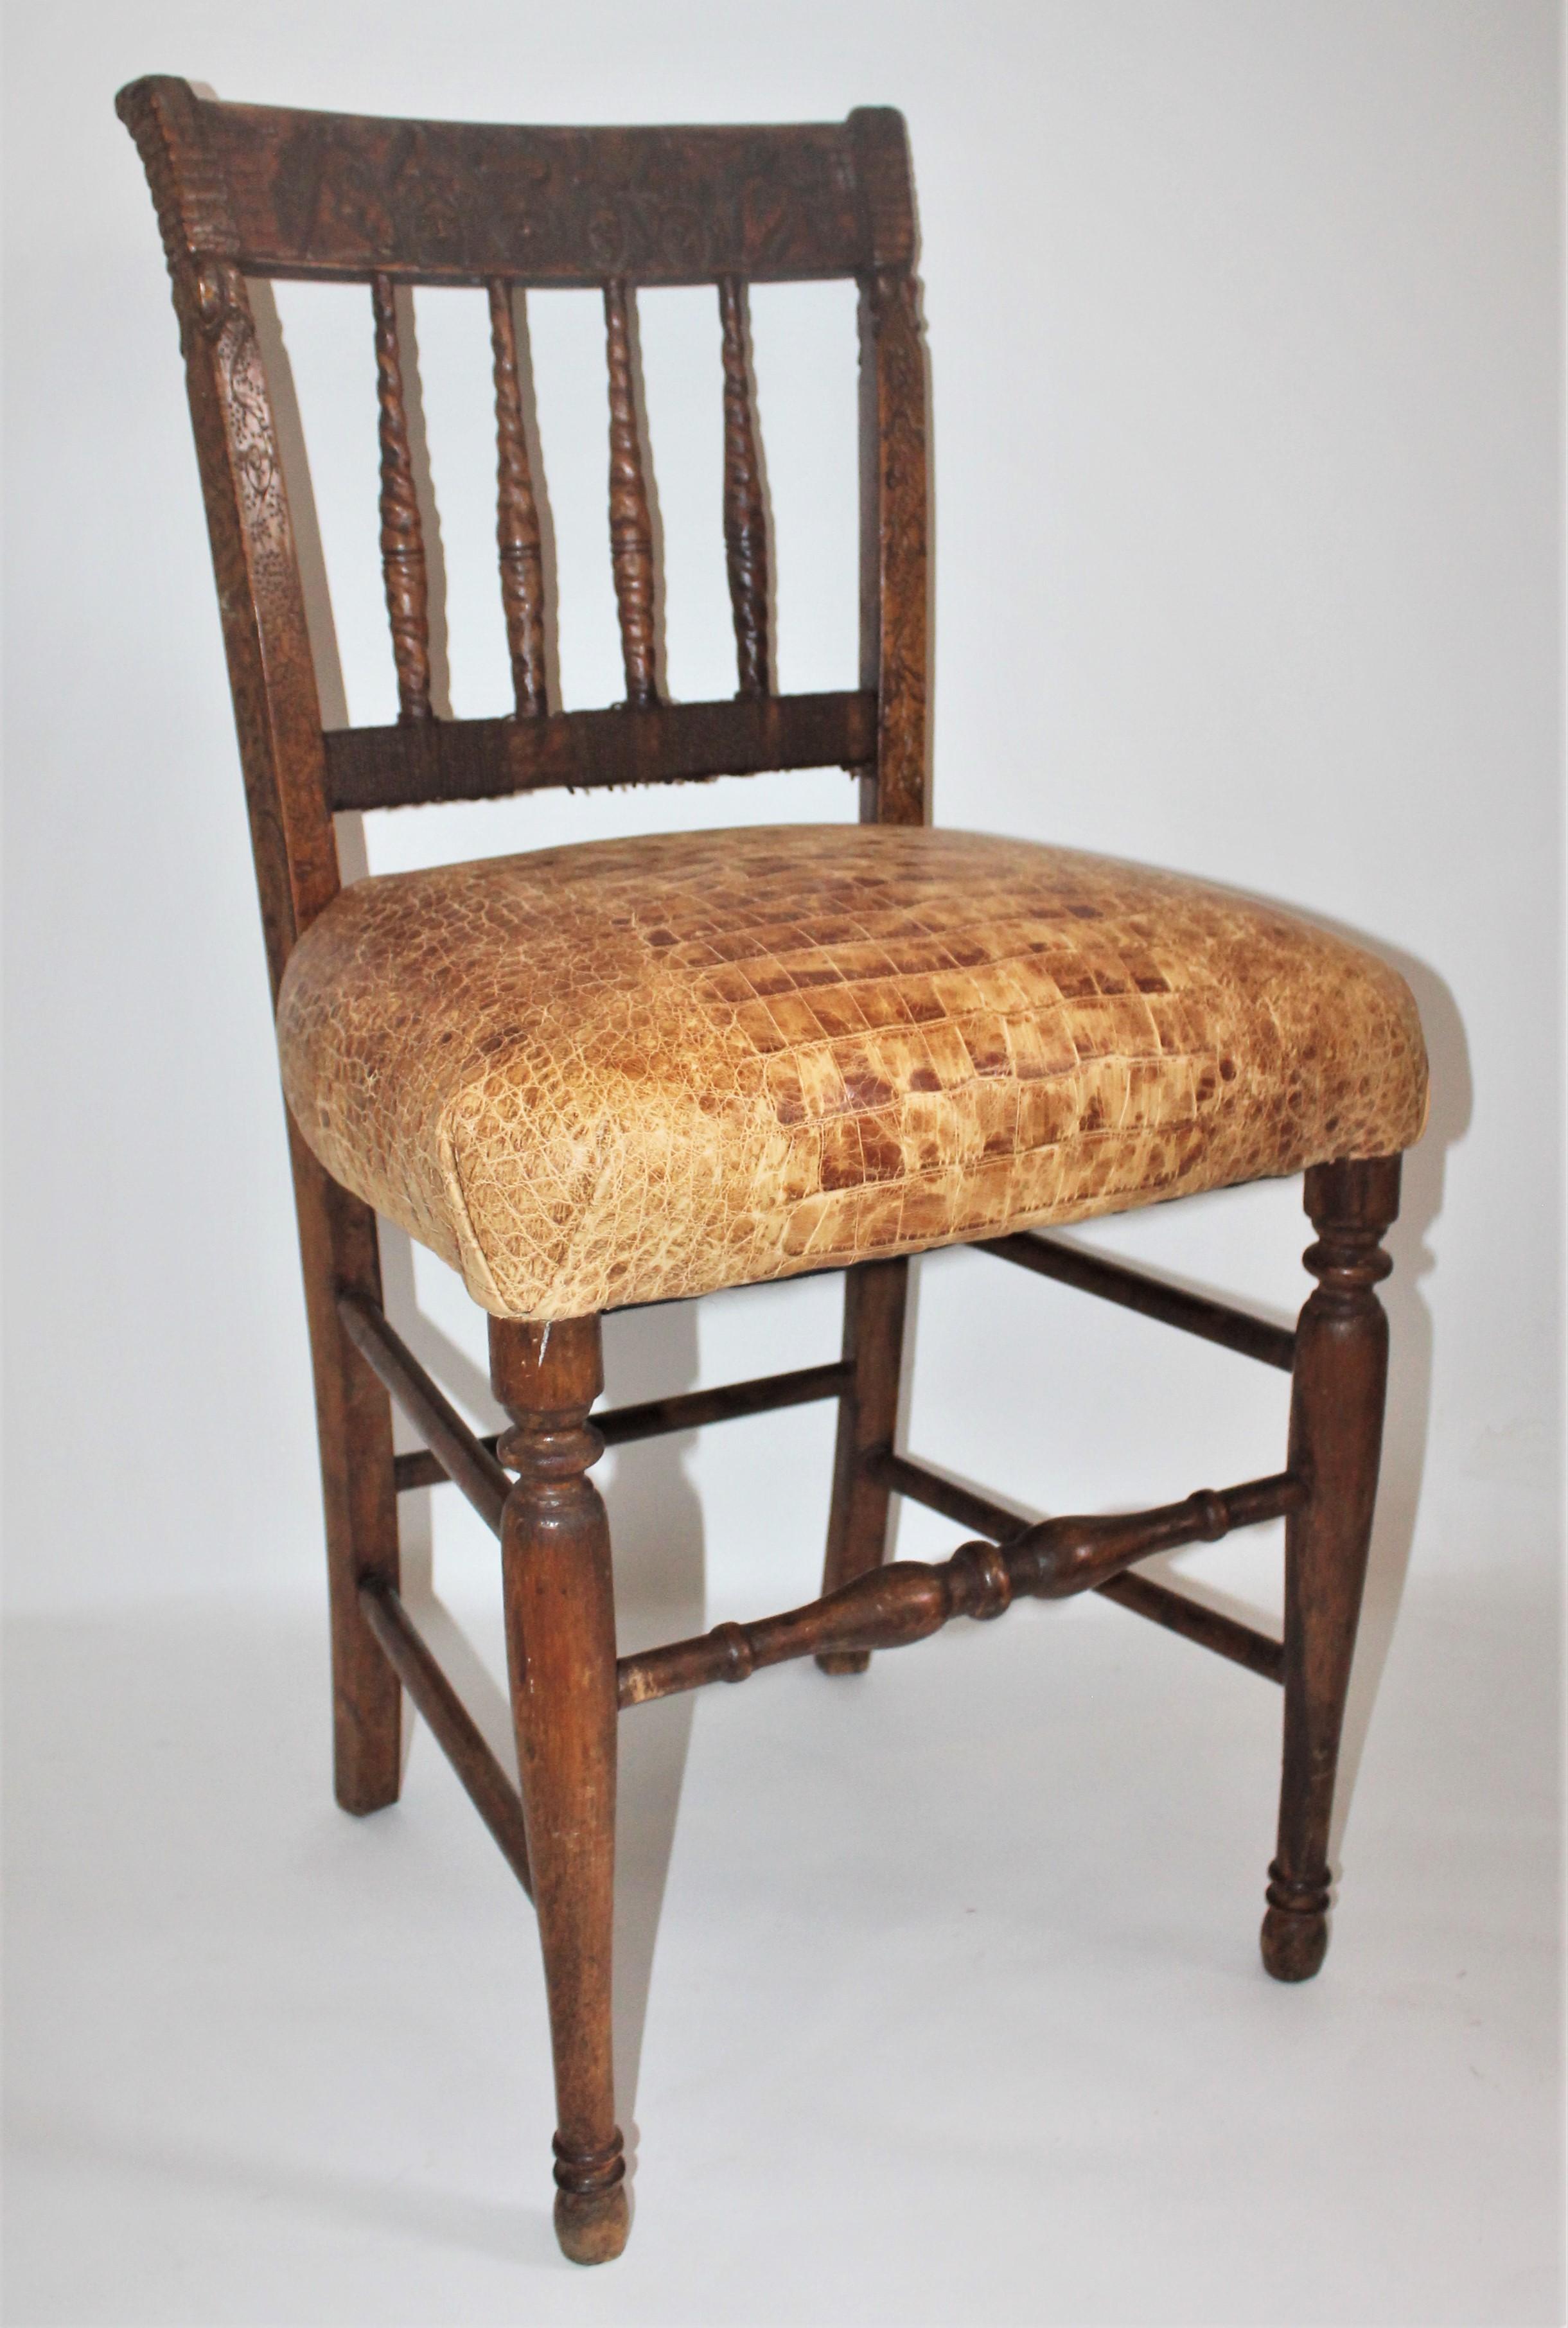 This amazing handmade English chess chair is hand carved. The chair seat is hand webbing made from hemp. The hand carved figurines and hand carved signature are on the top rail of the chair leading down the side rails. The name Langton is recorded